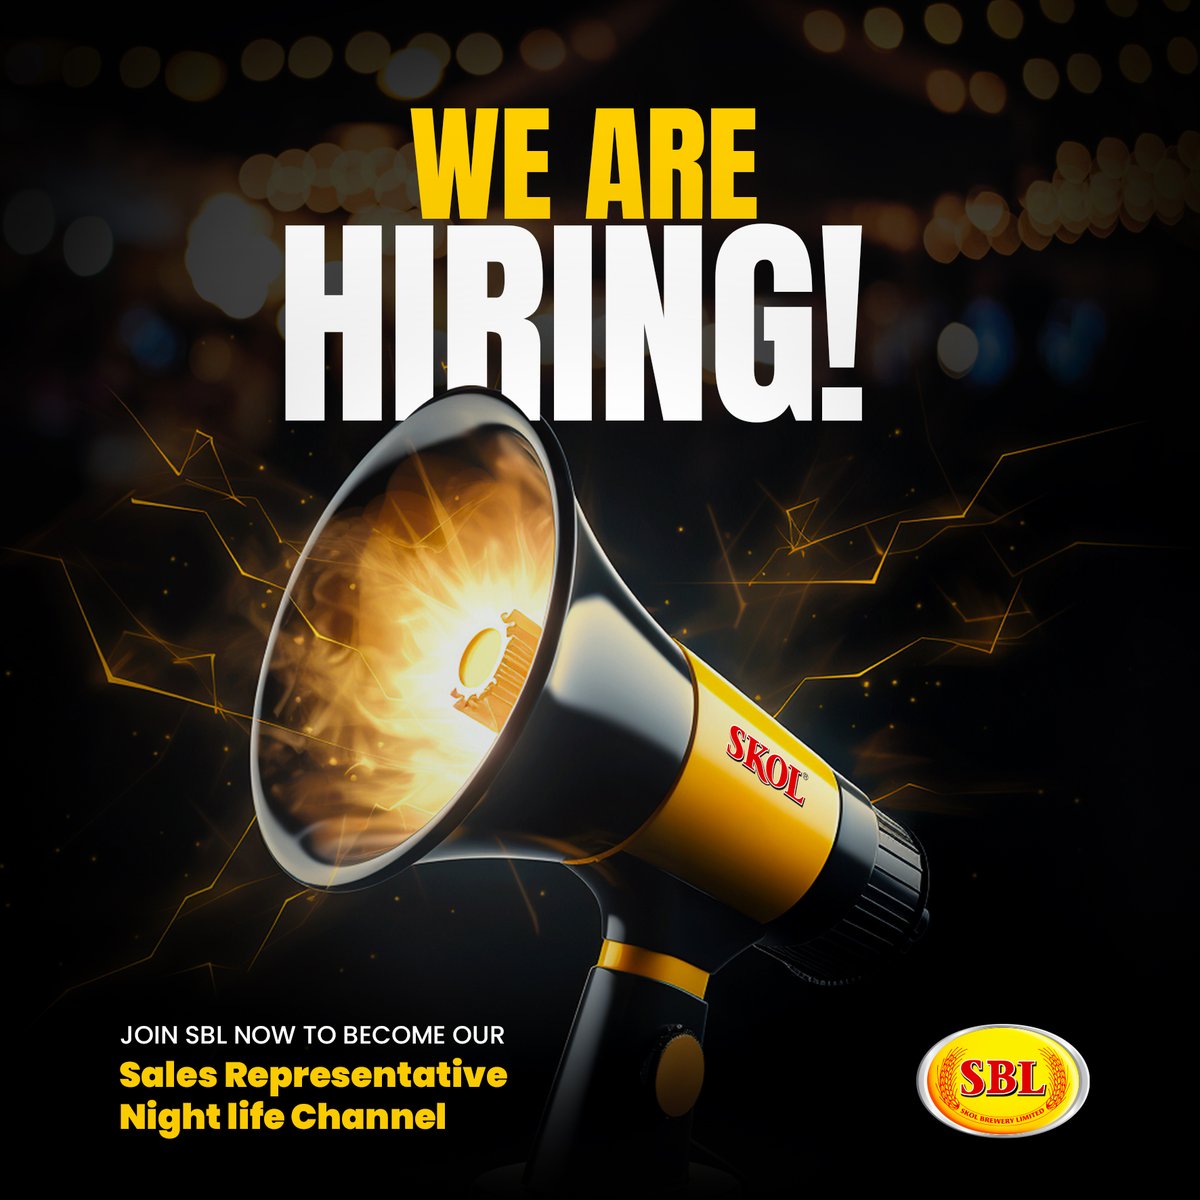 Interested in joining SKOL Brewery Ltd? Join our team as a Sales Representative Nightlife Channel! Hit the link below to apply and let's make some magic happen together! Apply now: skolbrewery-careers.rw/jobs/sales-rep…